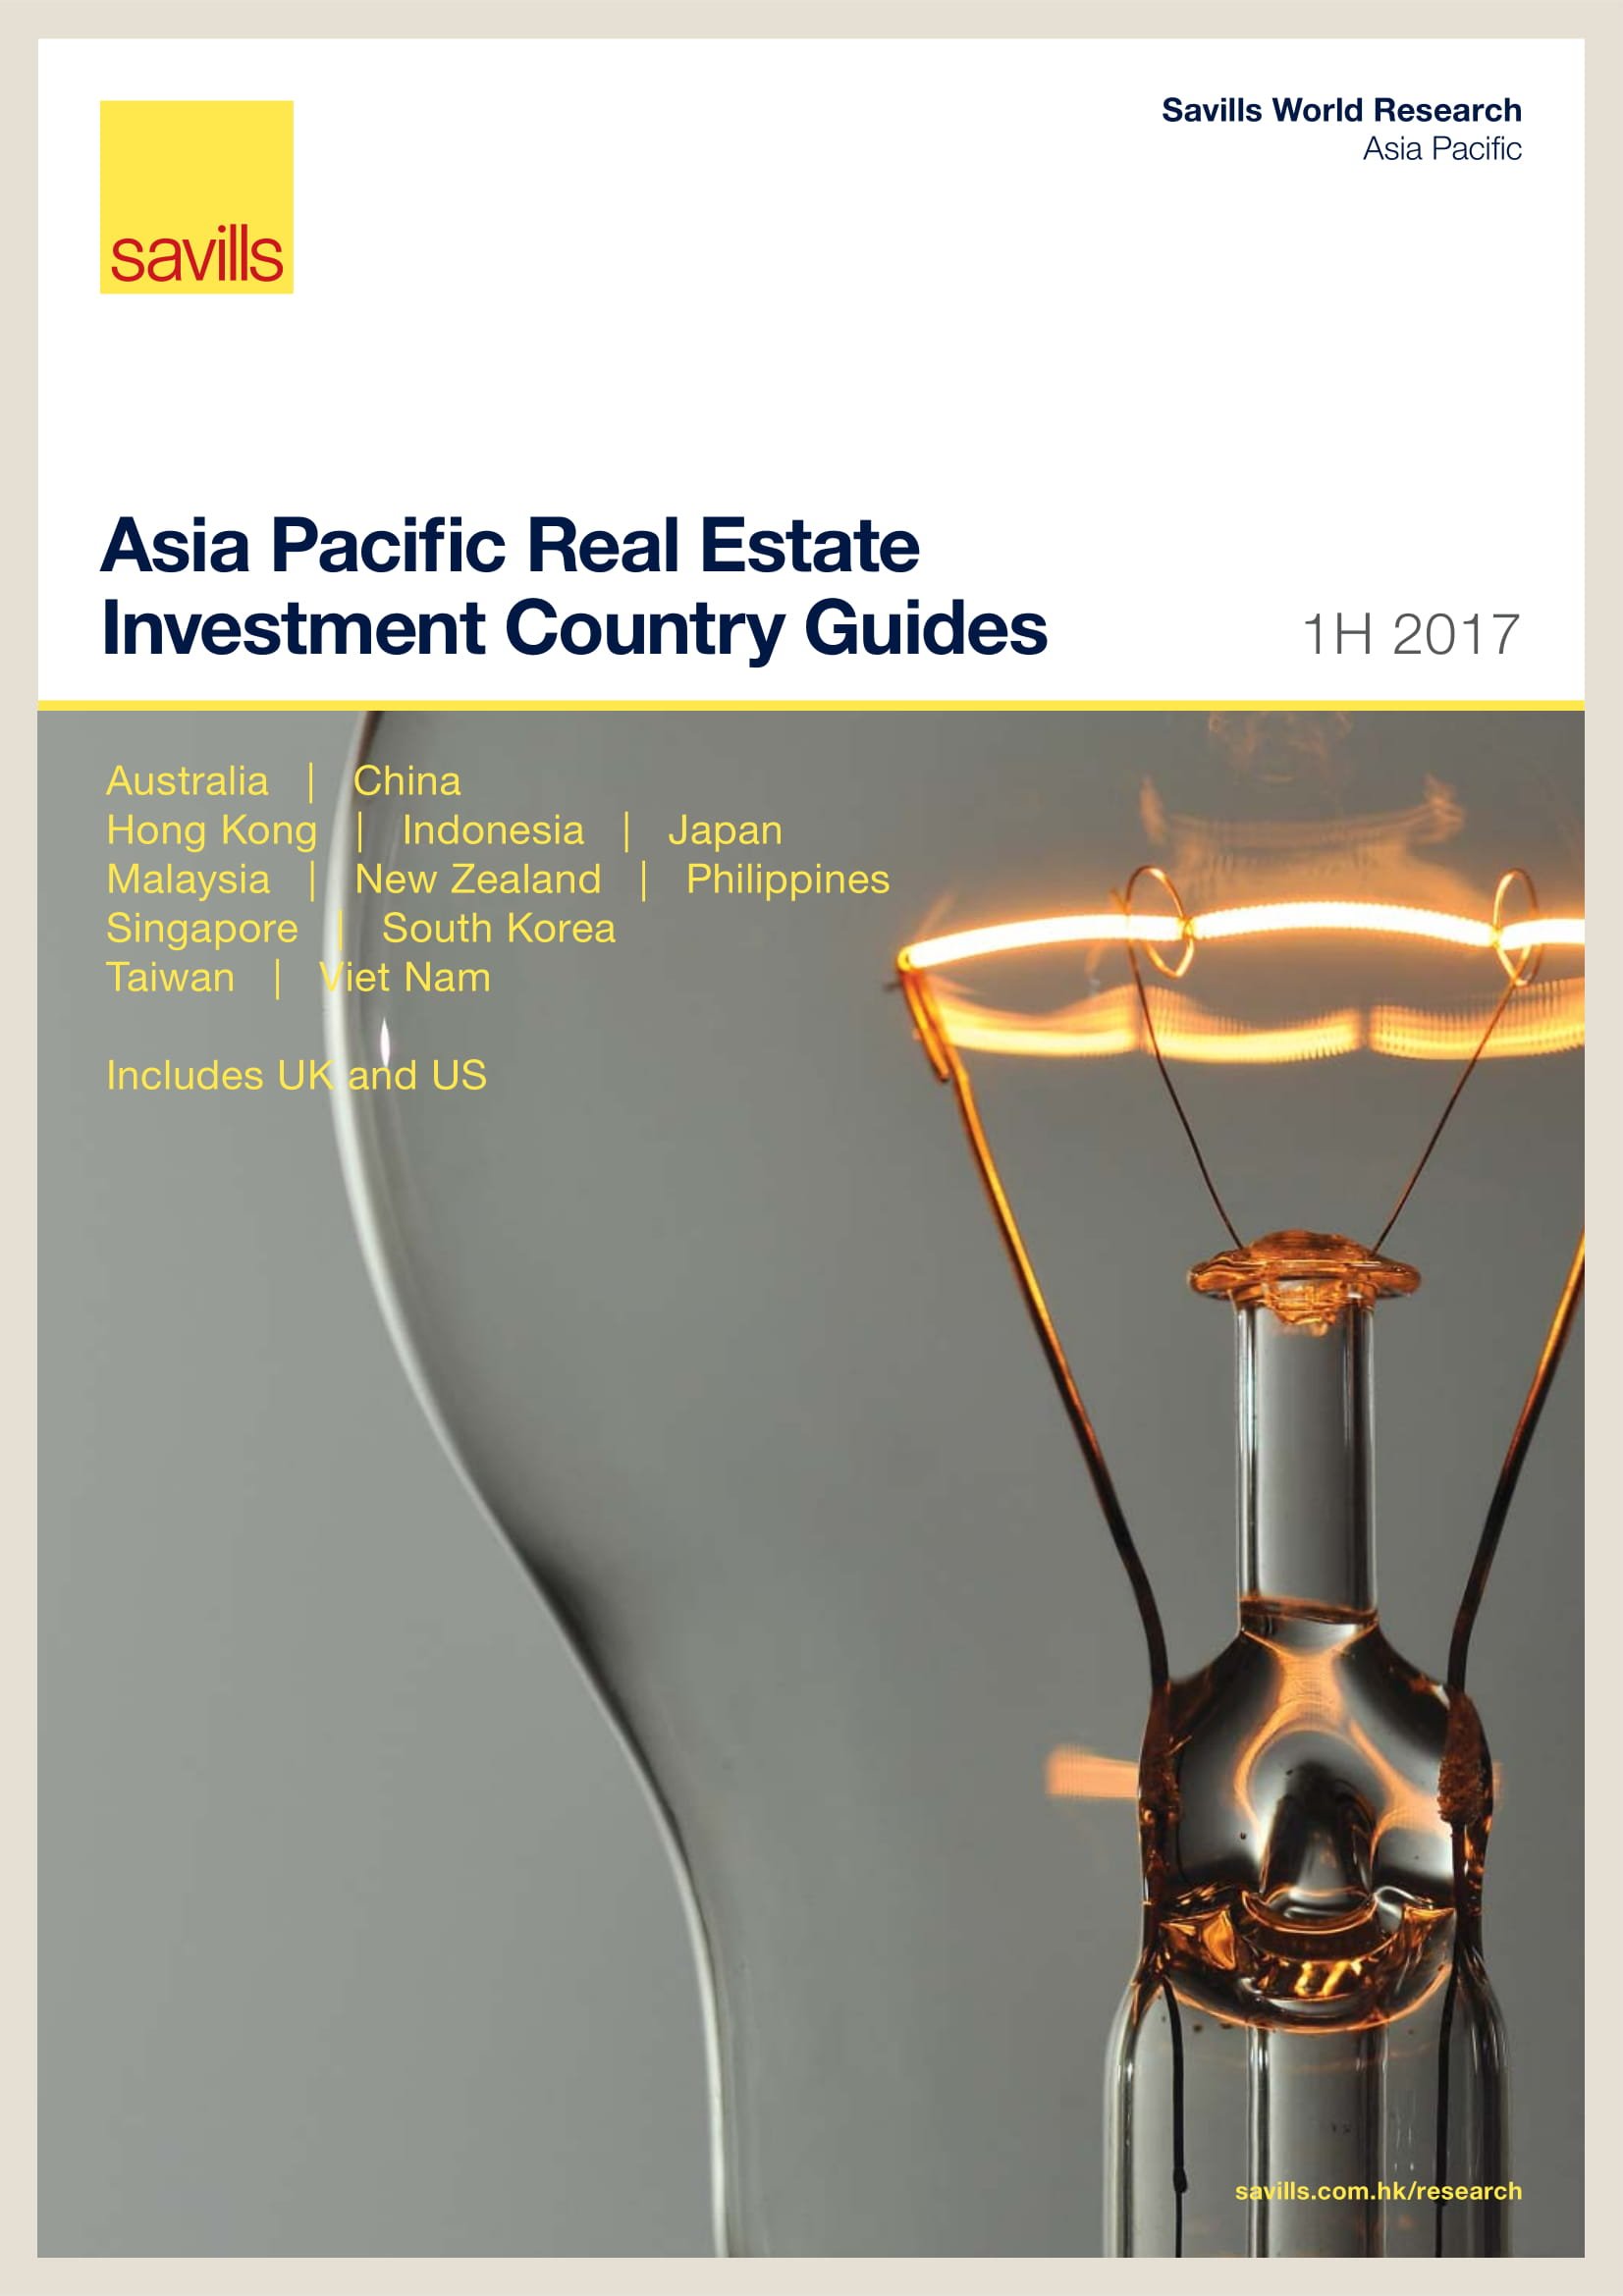 Asia Pacific Real Estate Investment Country Guides 1H 2017